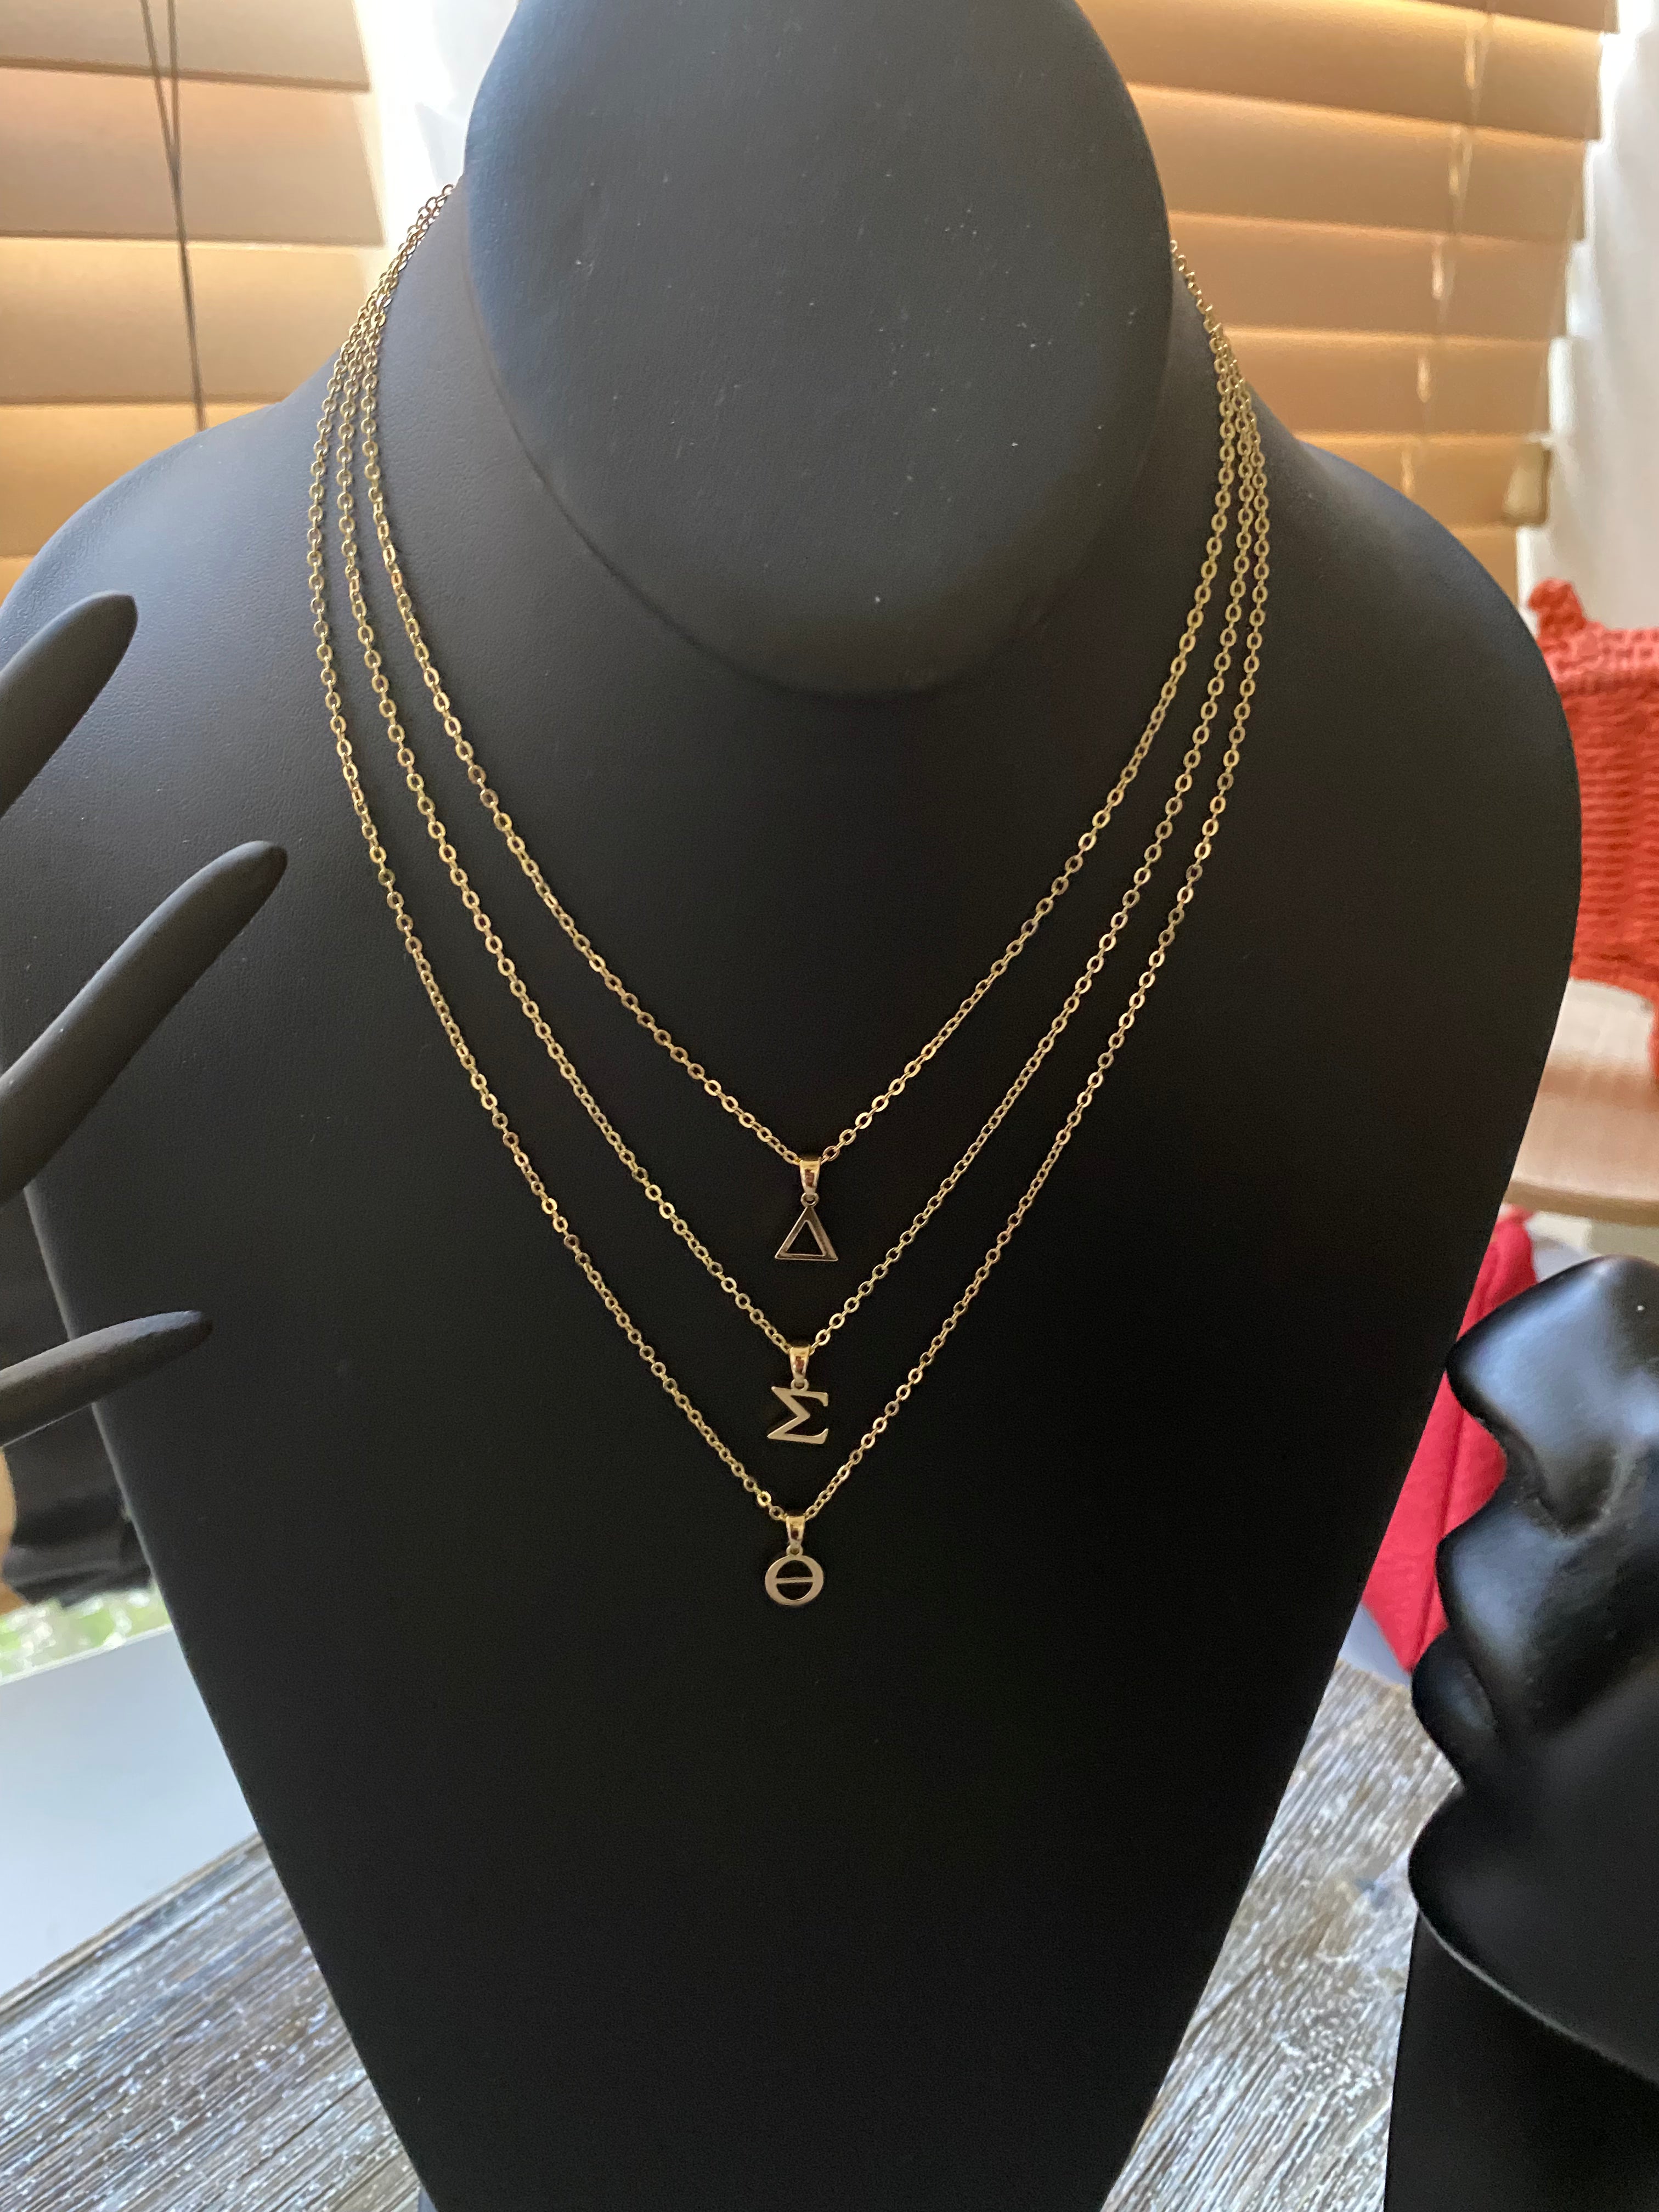 It's the DST for Me - 3 Chain Necklace